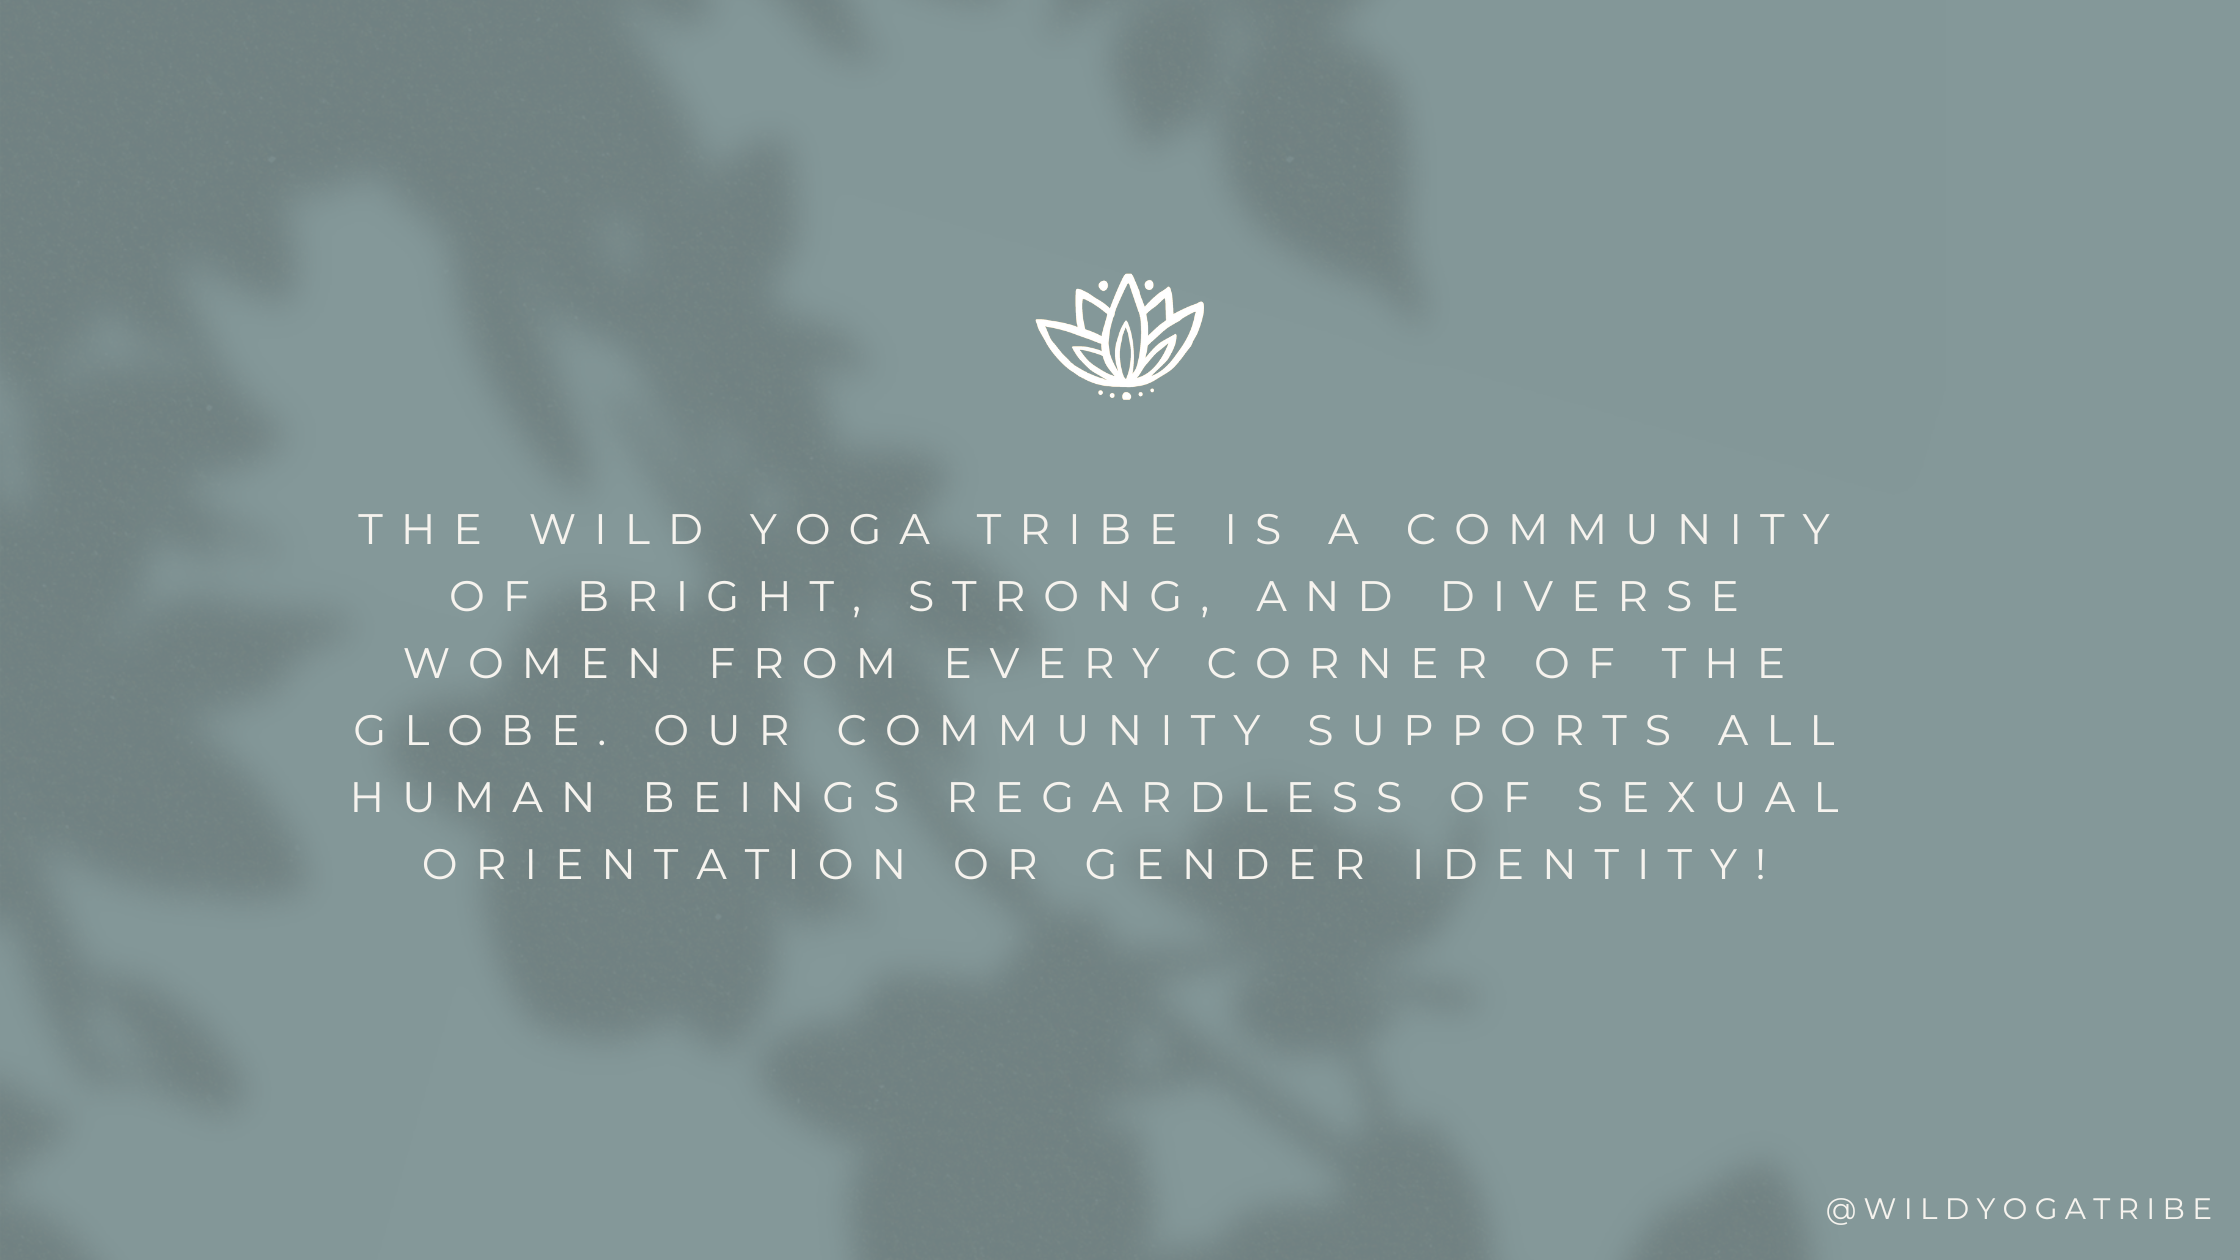 Women have fought to have their presence respected in yoga spaces for thousands of years. To celebrate Women’s History Month, we wanted to highlight women in yoga who pioneered the practice in America! We hope their contributions will continue to be recognized throughout the community.